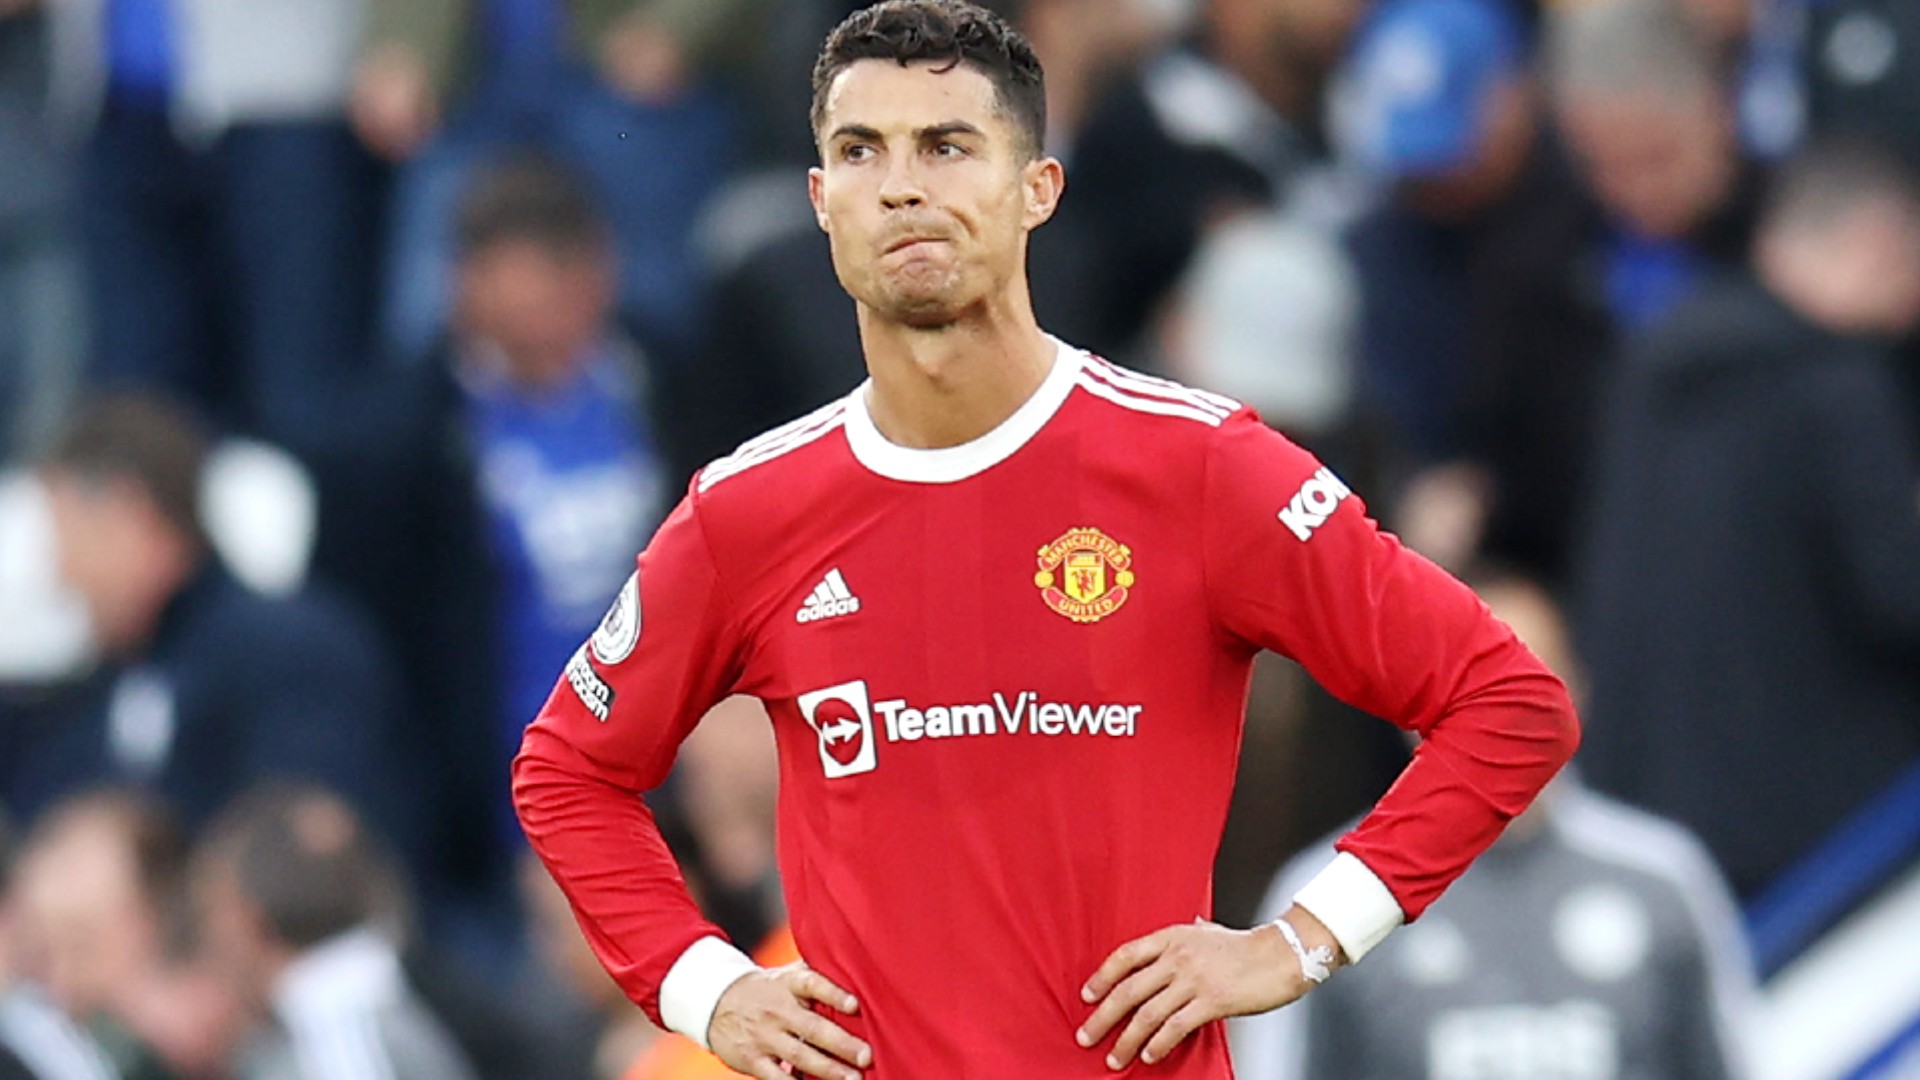 Cristiano Ronaldo interview: Man United's CR7 sends sharp message to teammates and club